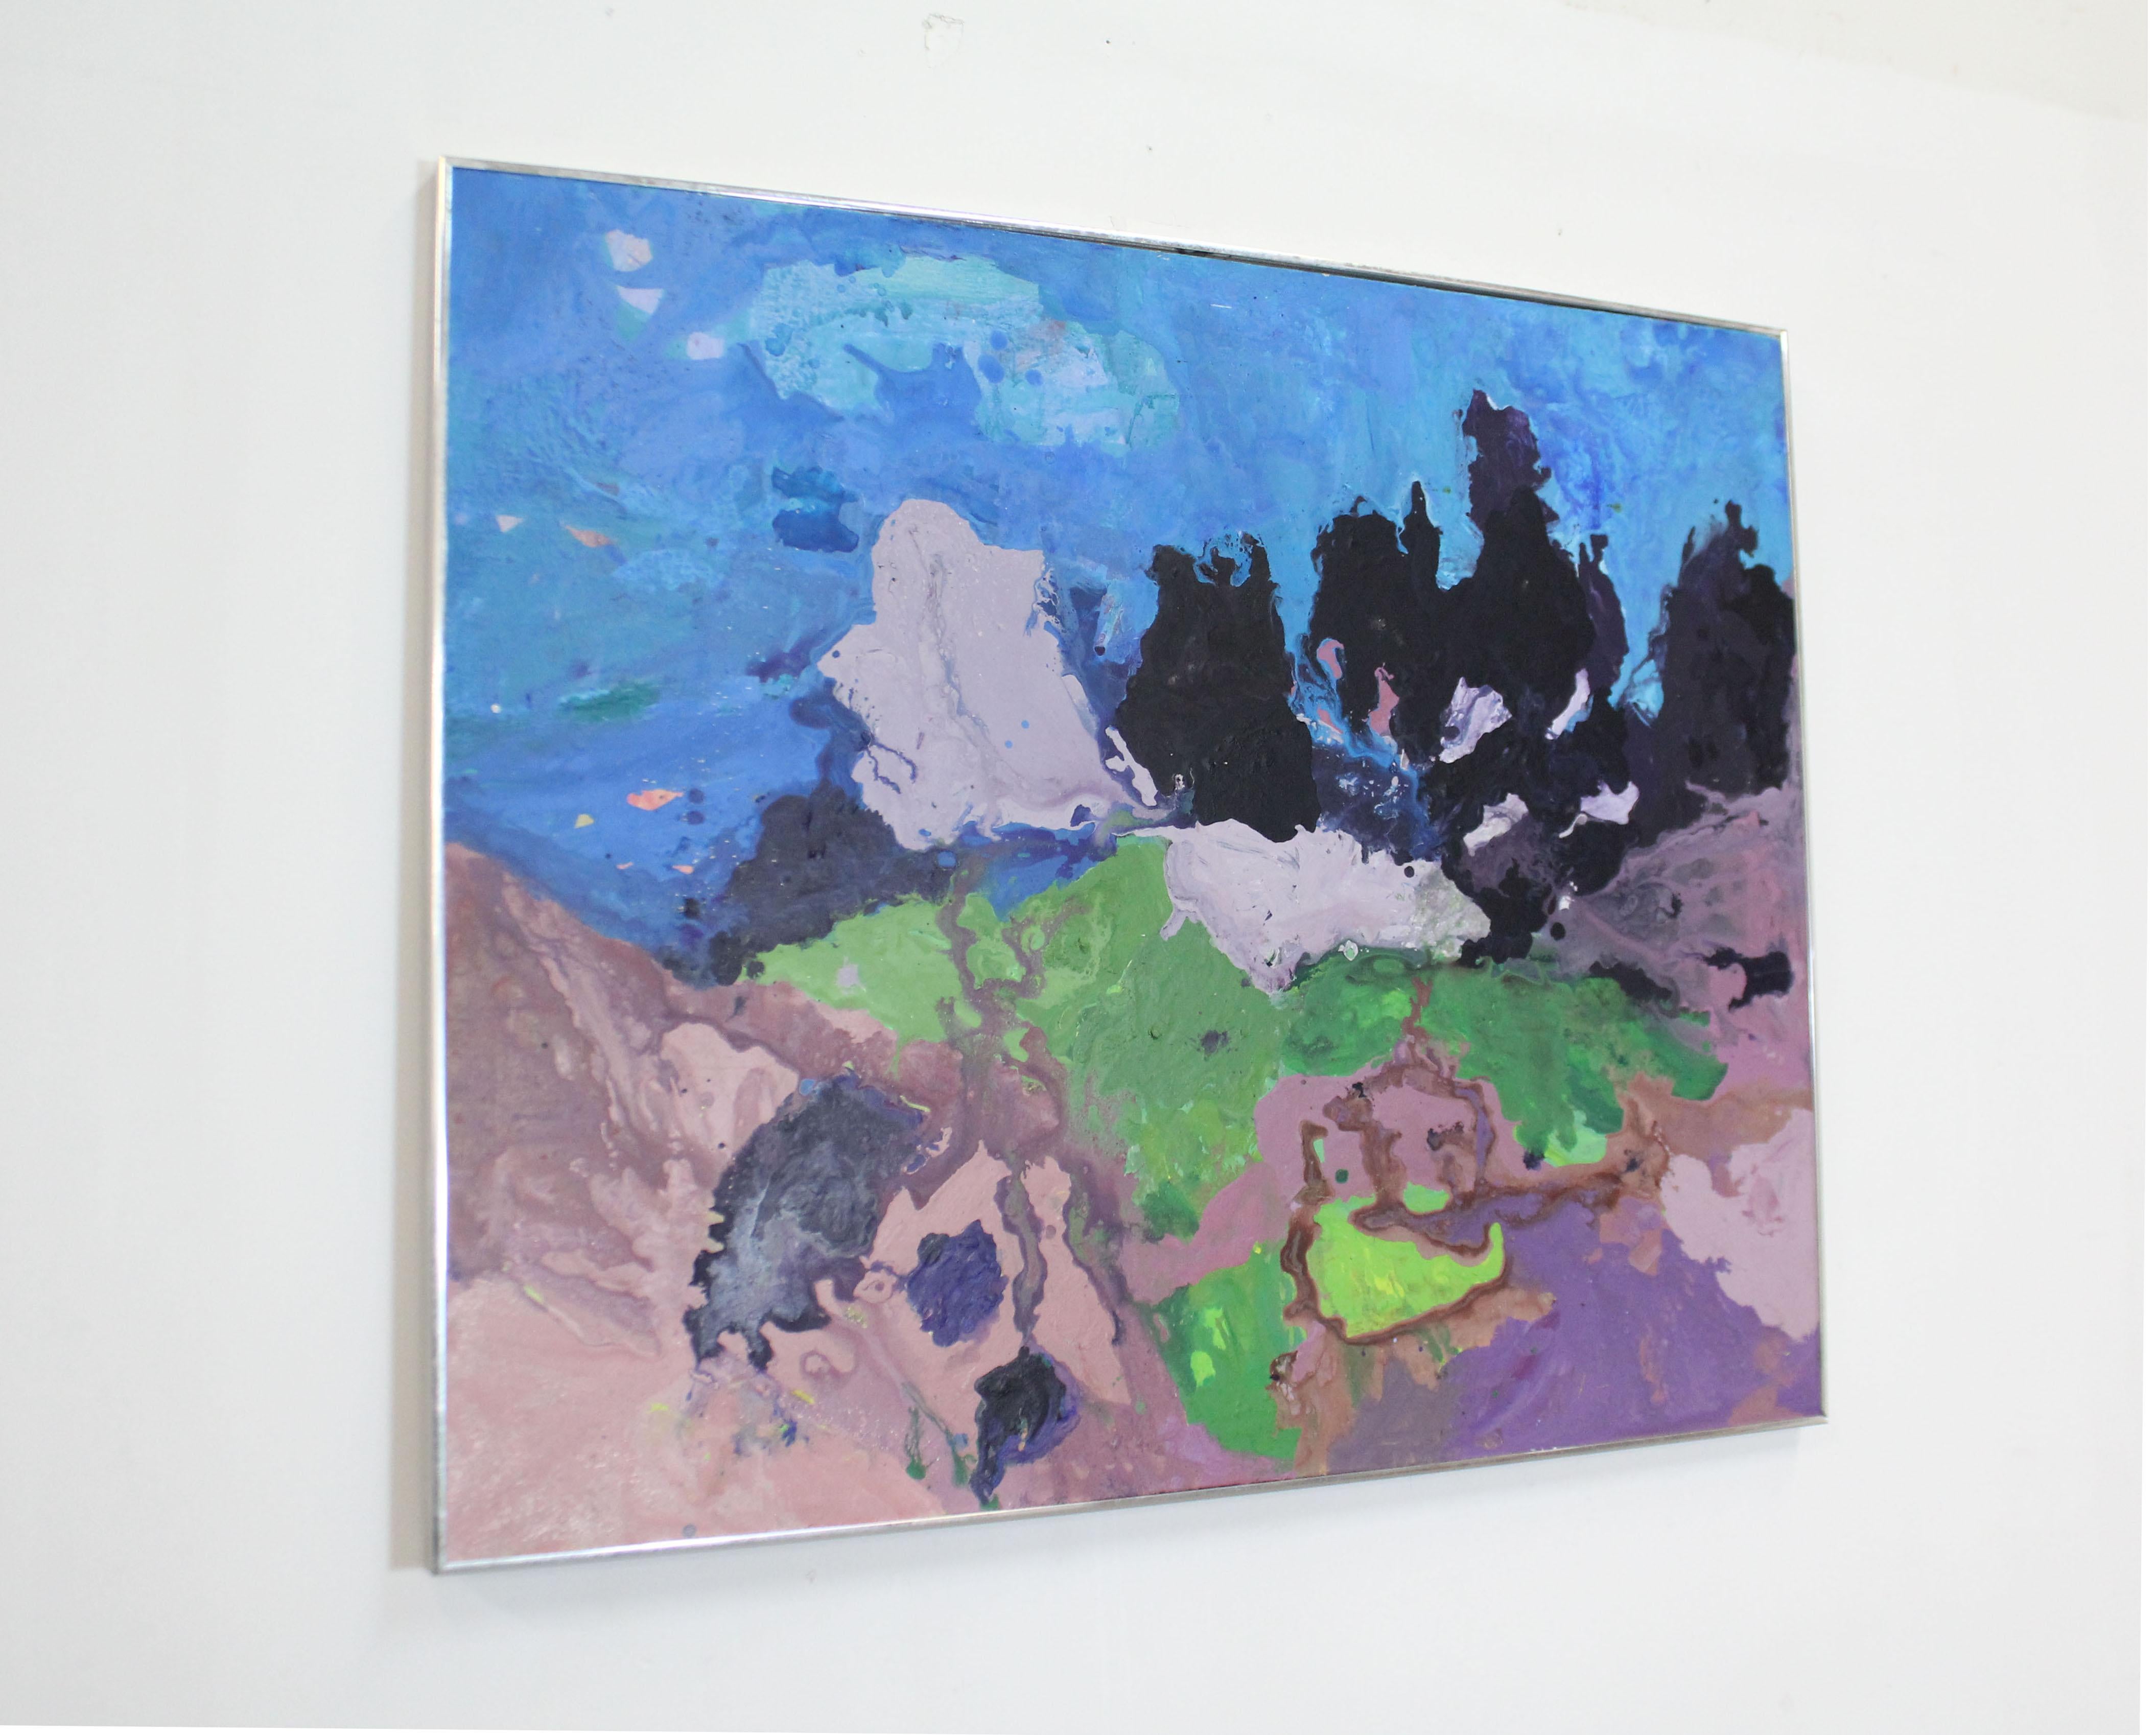 Offered is a vintage framed abstract modern oil painting on canvas entitled 'Kokee'. Features an abstract landscape design with hues of purple, green, blue, and black blending together on the canvas. In good condition with some wear on the metal